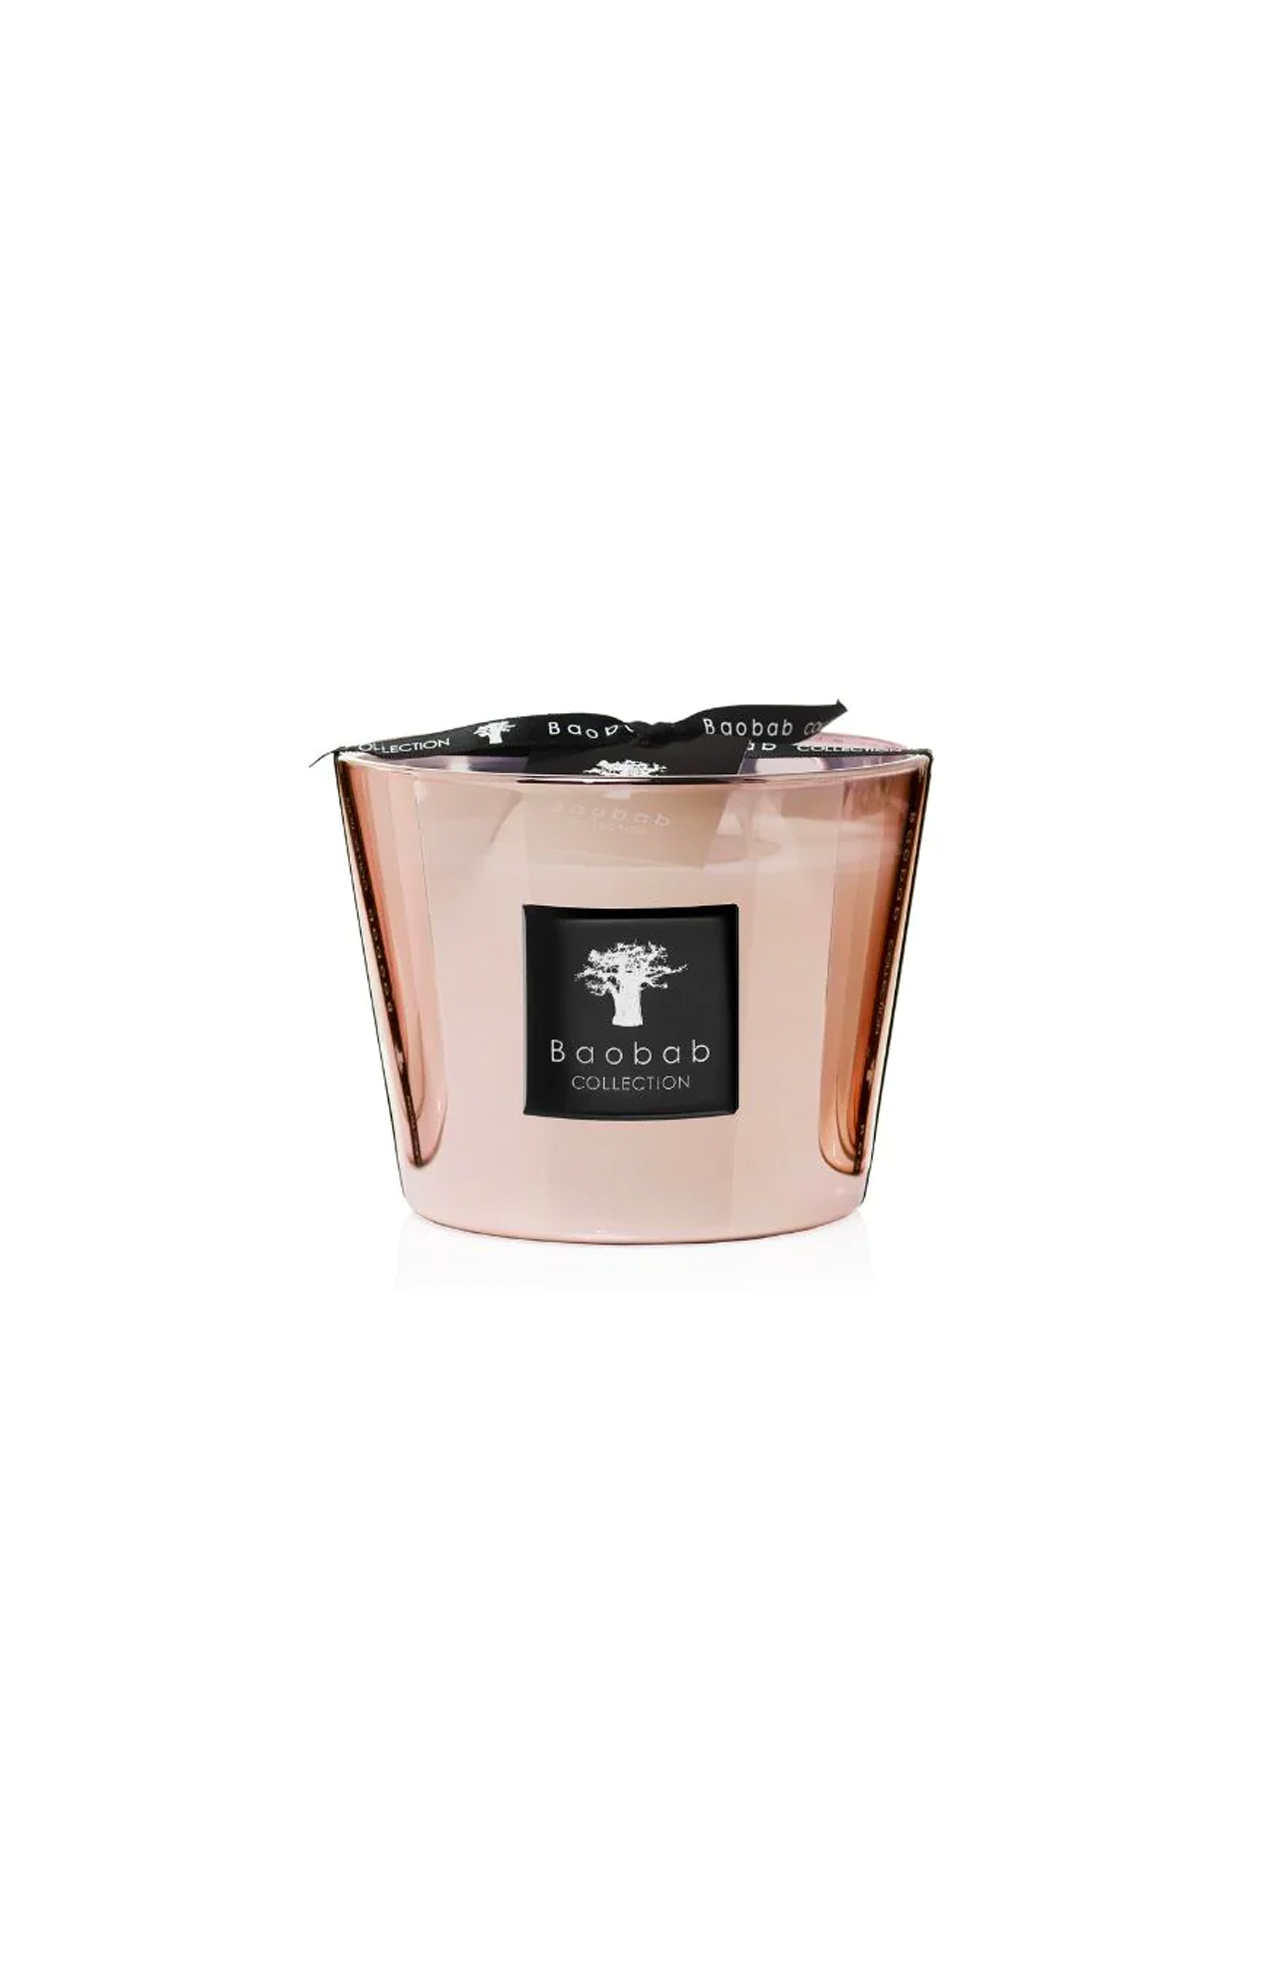 Baobab Candle Les Exclusives Roseum in Metallic Rose, Product Image (7063259021427)